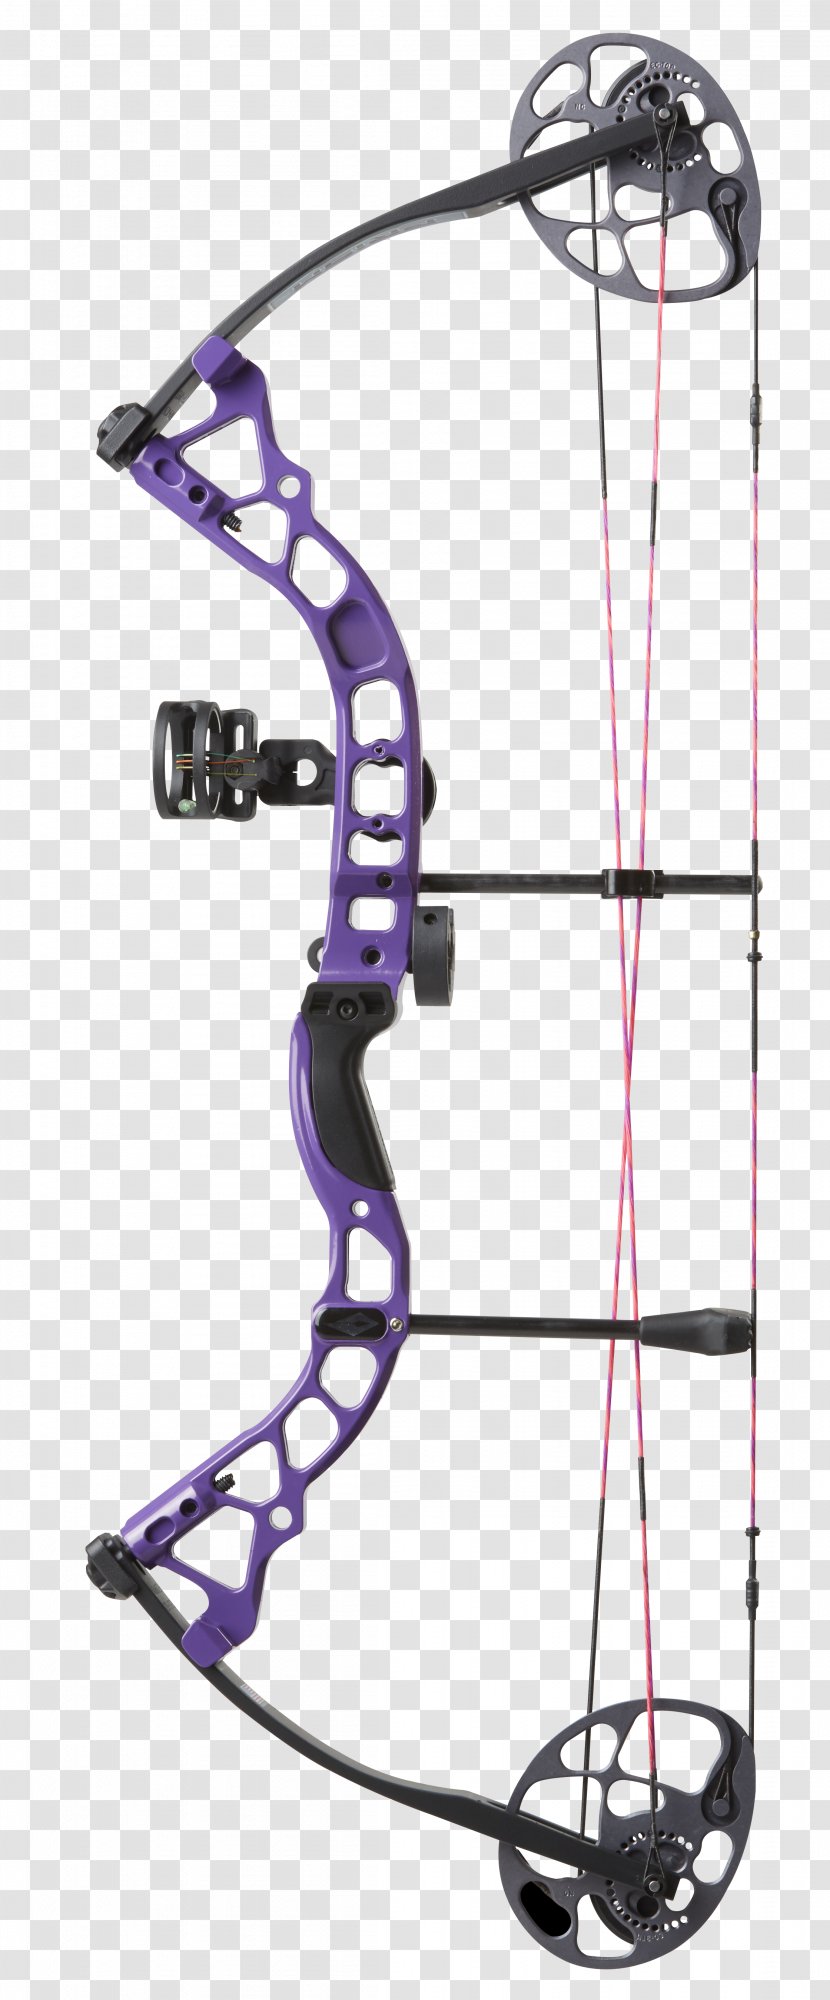 Compound Bows Bow And Arrow Archery Hunting Binary Cam Transparent PNG